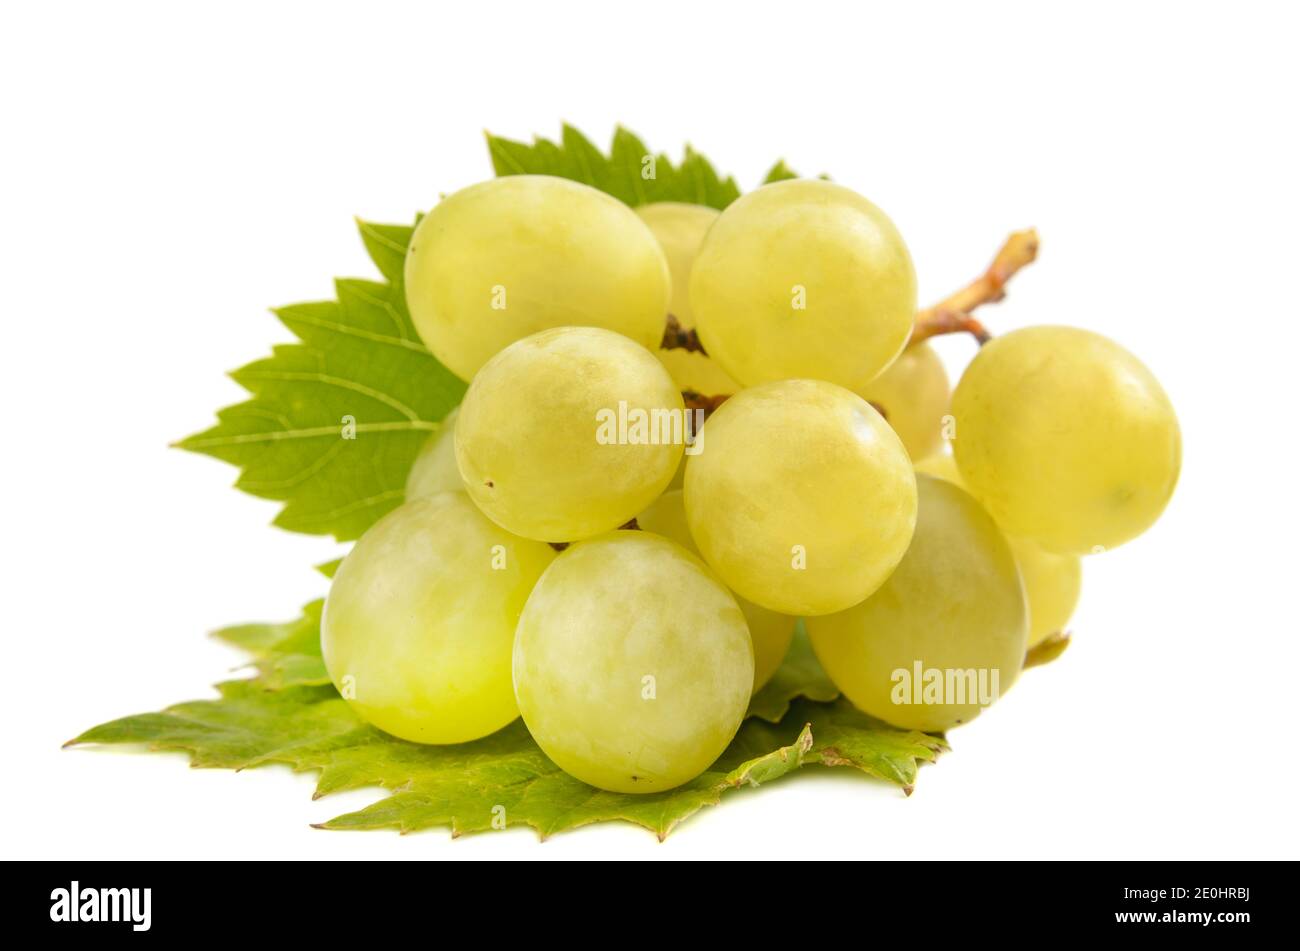 berries and a branch of grapes on a white background, blank for your photo manipulations Stock Photo